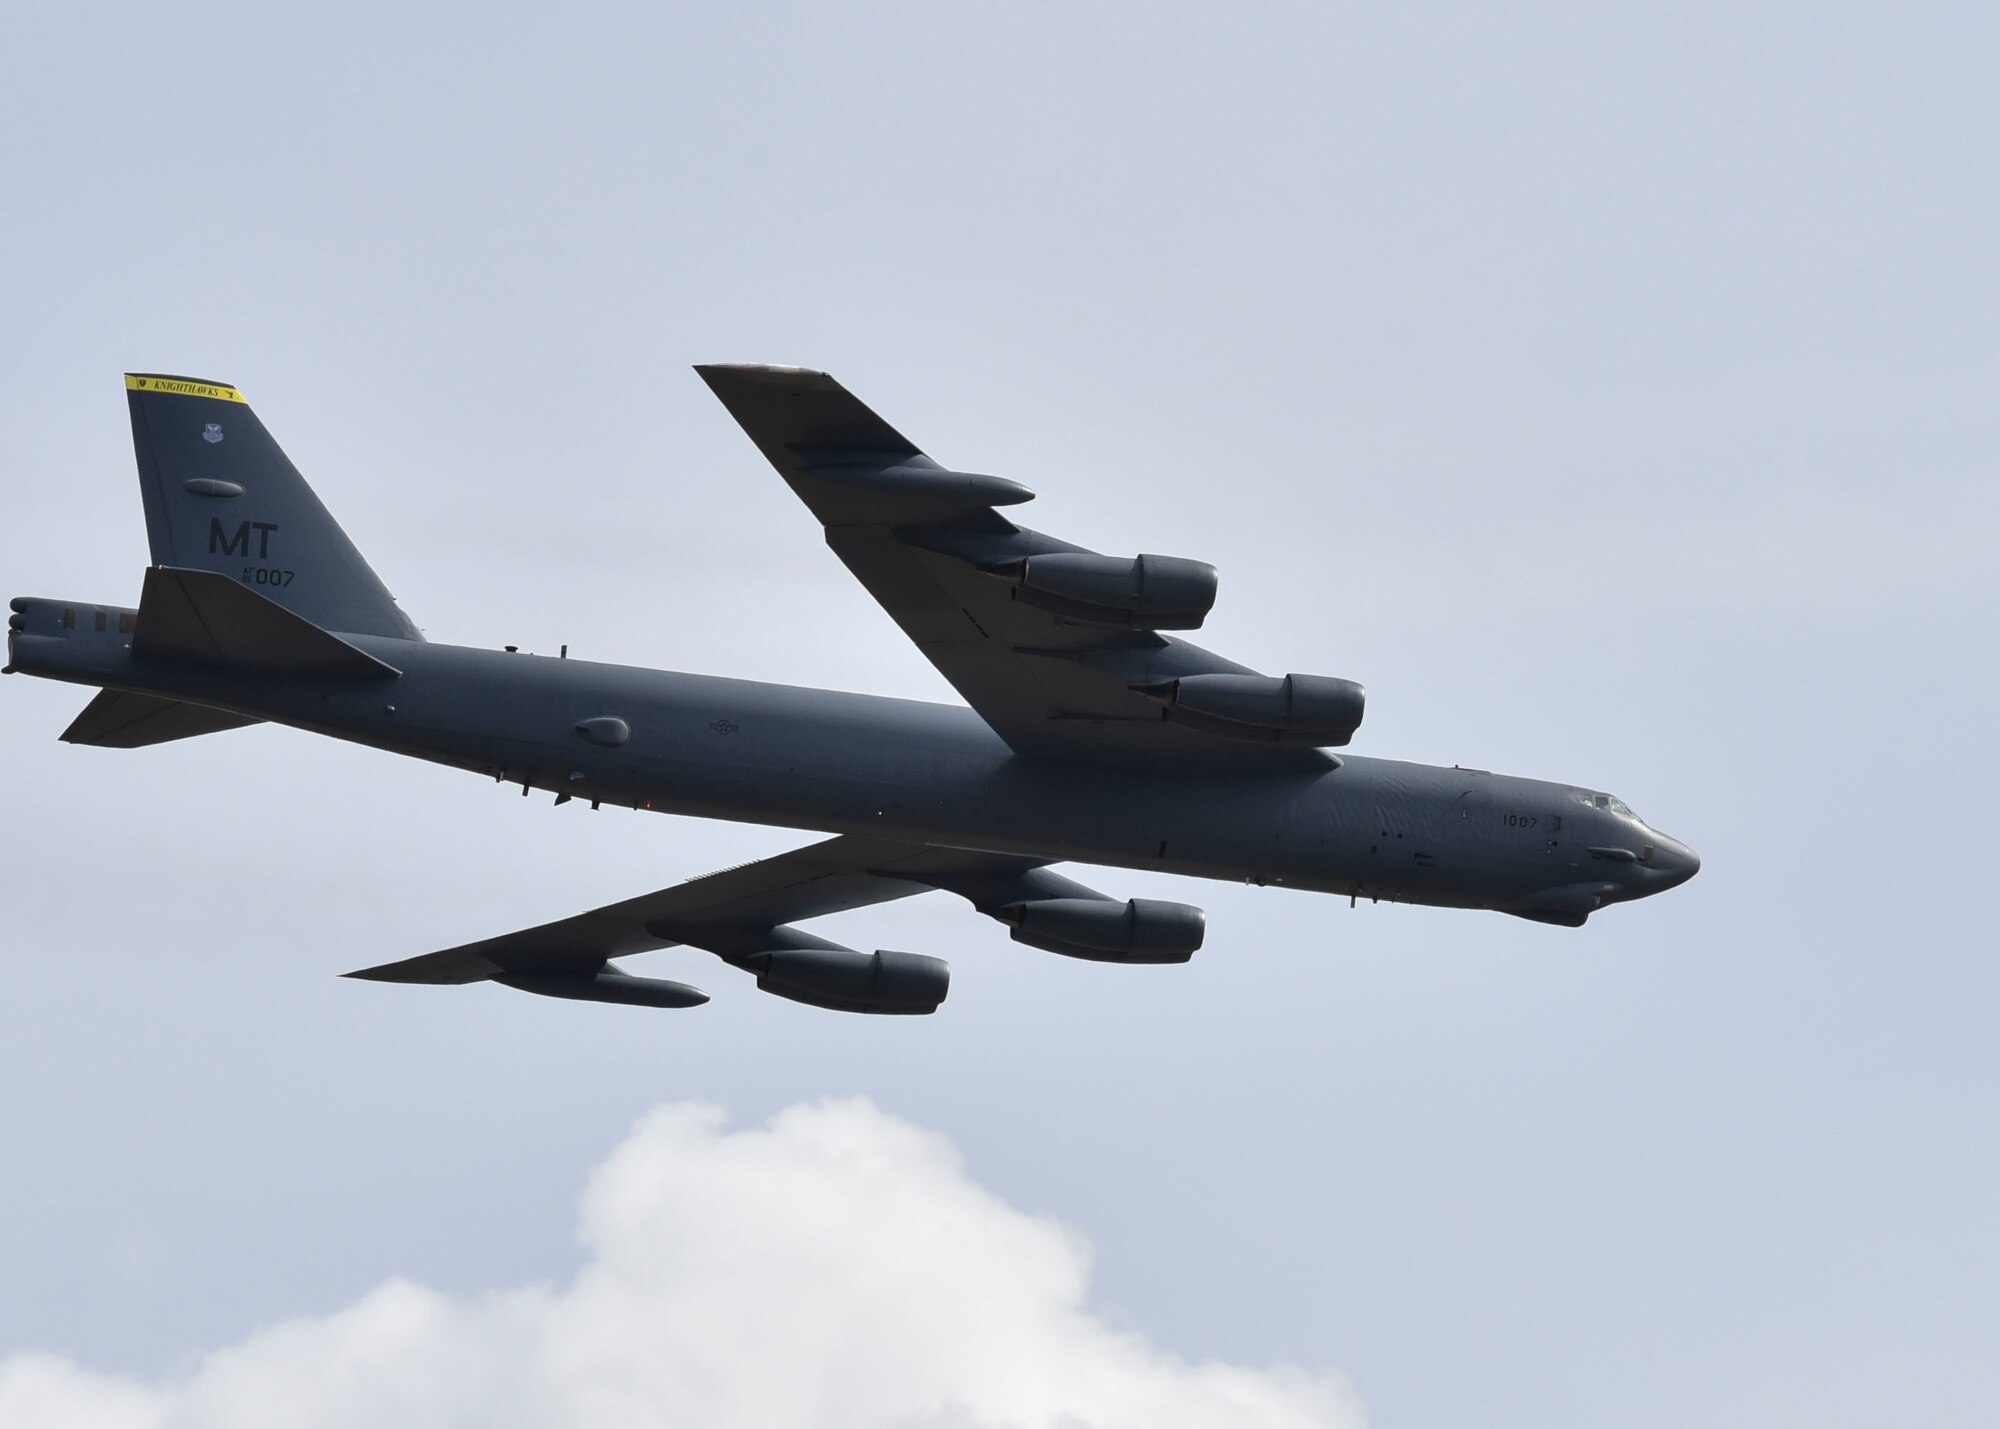 A B-52 Stratofortress conducts a fly-over during the Skyfest 2019 Open House and Airshow at Fairchild Air Force Base, Washington, June 22, 2019. Fairchild opened its gates to the public for a free one-day event to showcase Pacific Northwest airpower and U.S. Air Force capabilities. The airshow included the F-22 Demonstration Team, U.S. Army Golden Knights and 11 other aerial acts. (U.S. Air Force photo by Airman Kiaundra Miller)